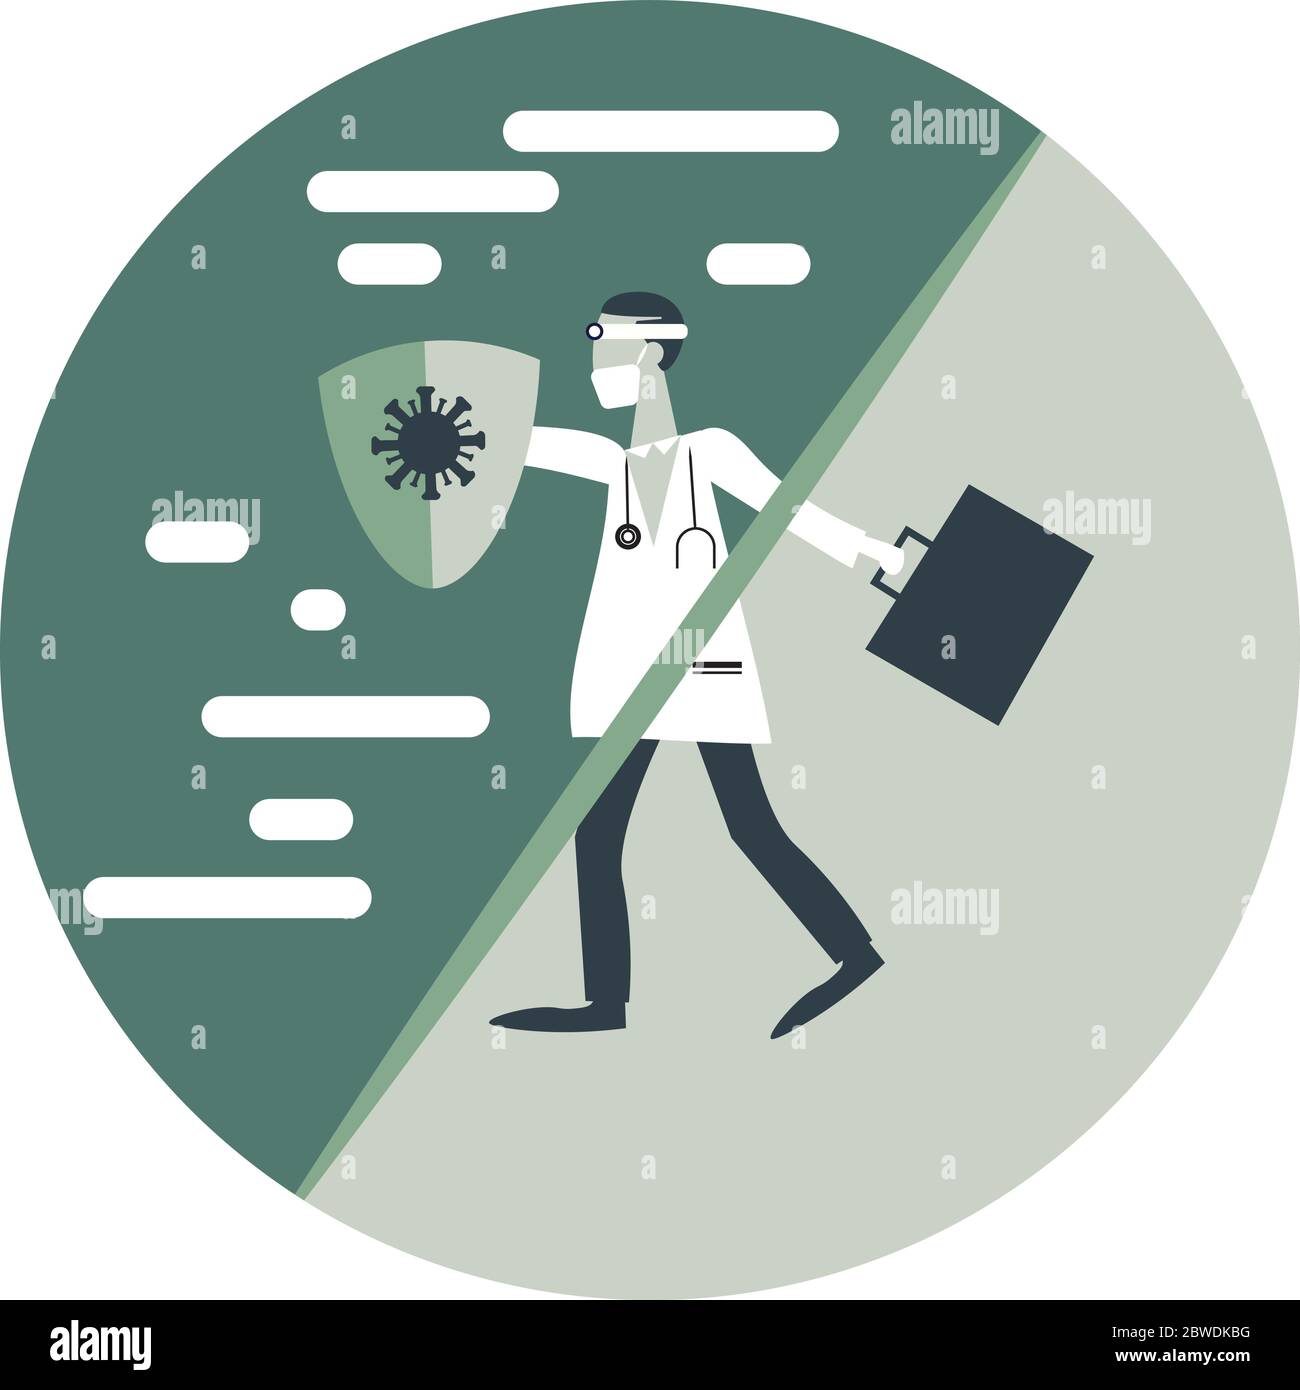 A Masked Doctor using A Shield runs From Normal into New Normal Condition Due to Corona Virus Covid 19 Pandemic Stock Vector